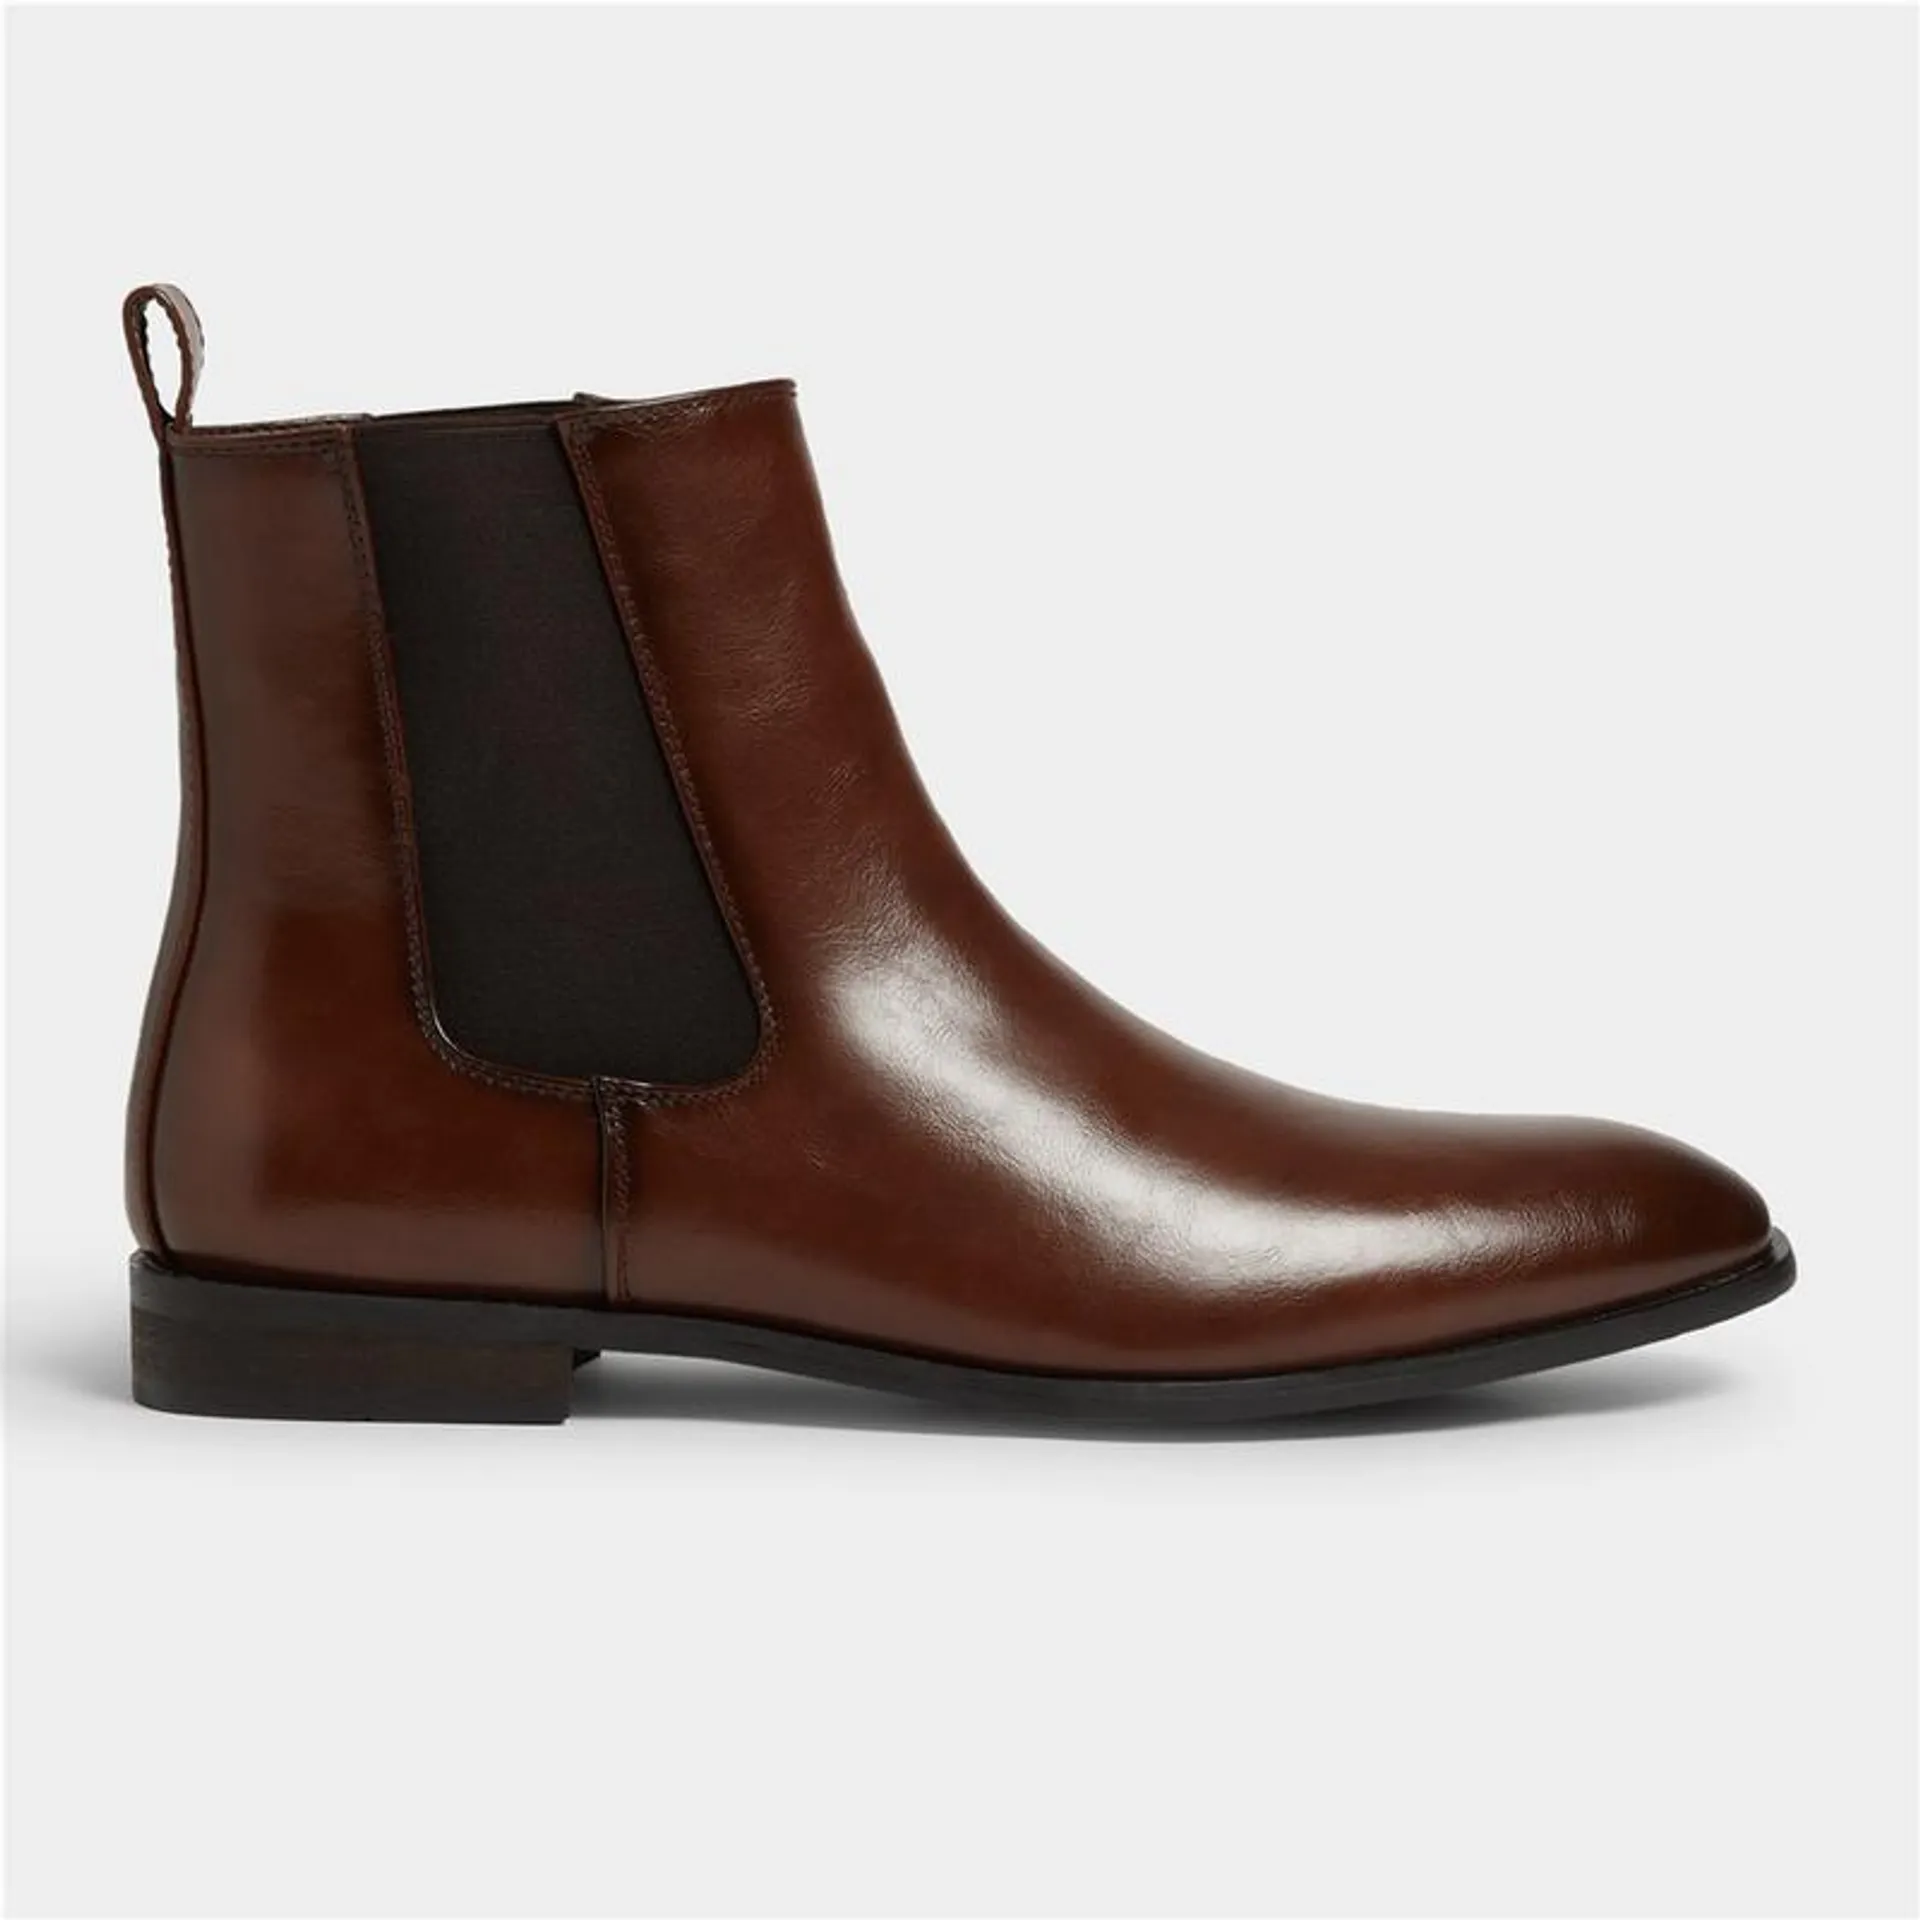 MKM Brown Chelsea PU Boot